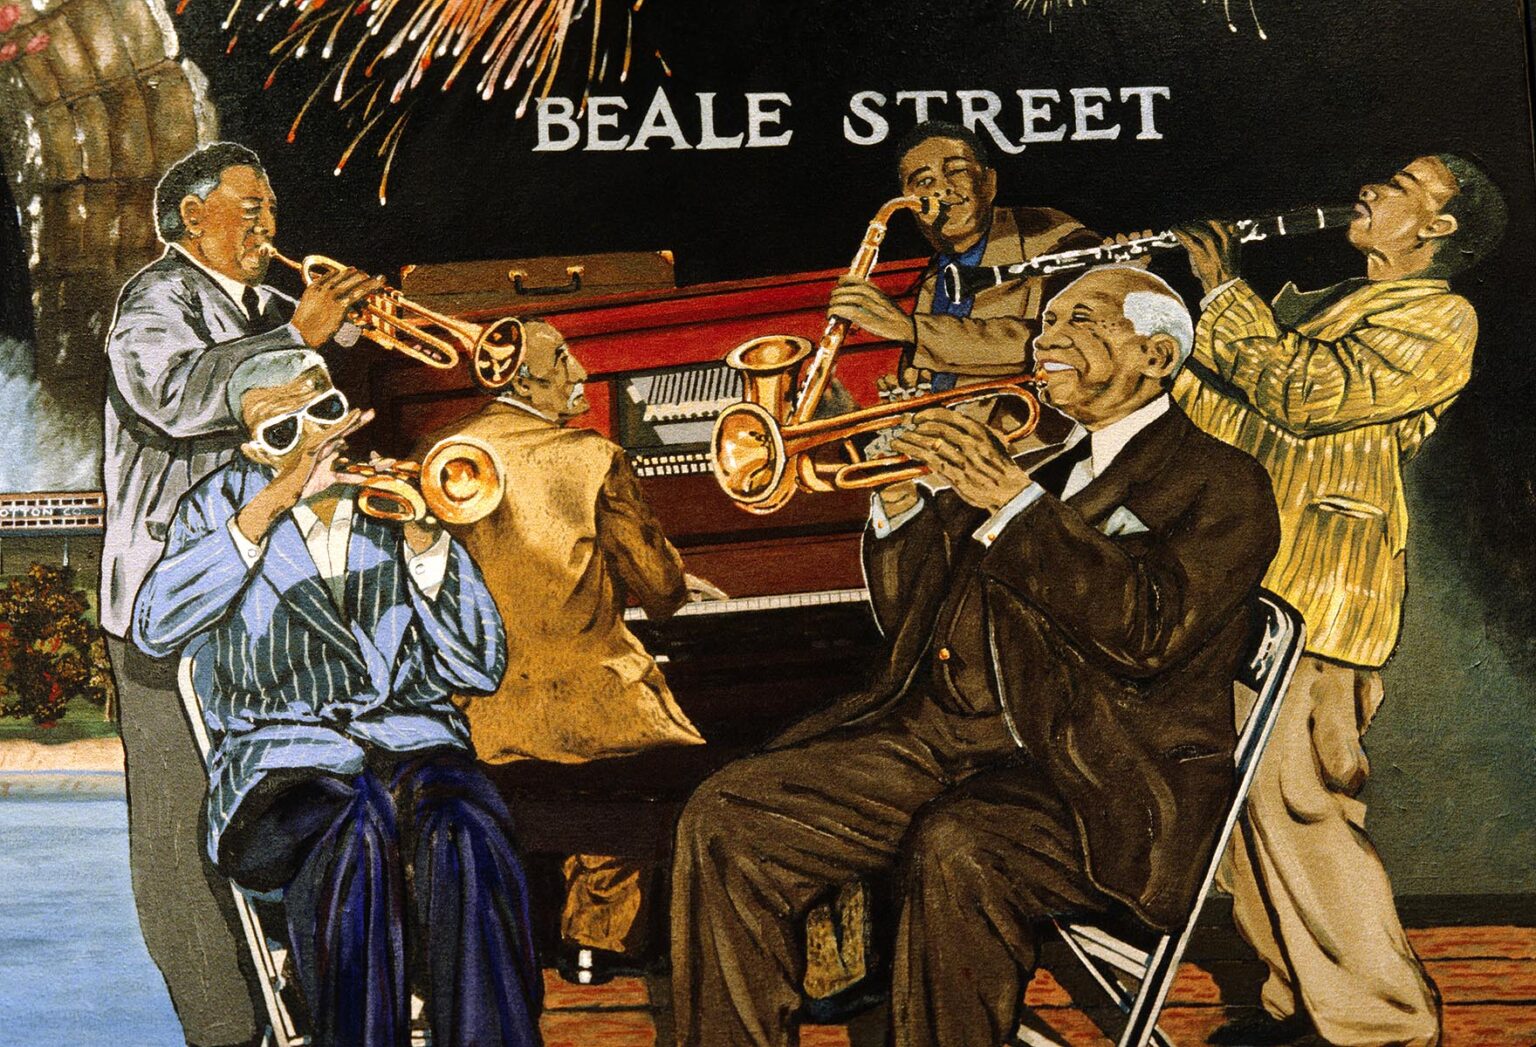 MURAL of BEALE STREET JAZZ MUSICIANS performing - MEMPHIS, TENNESSEE